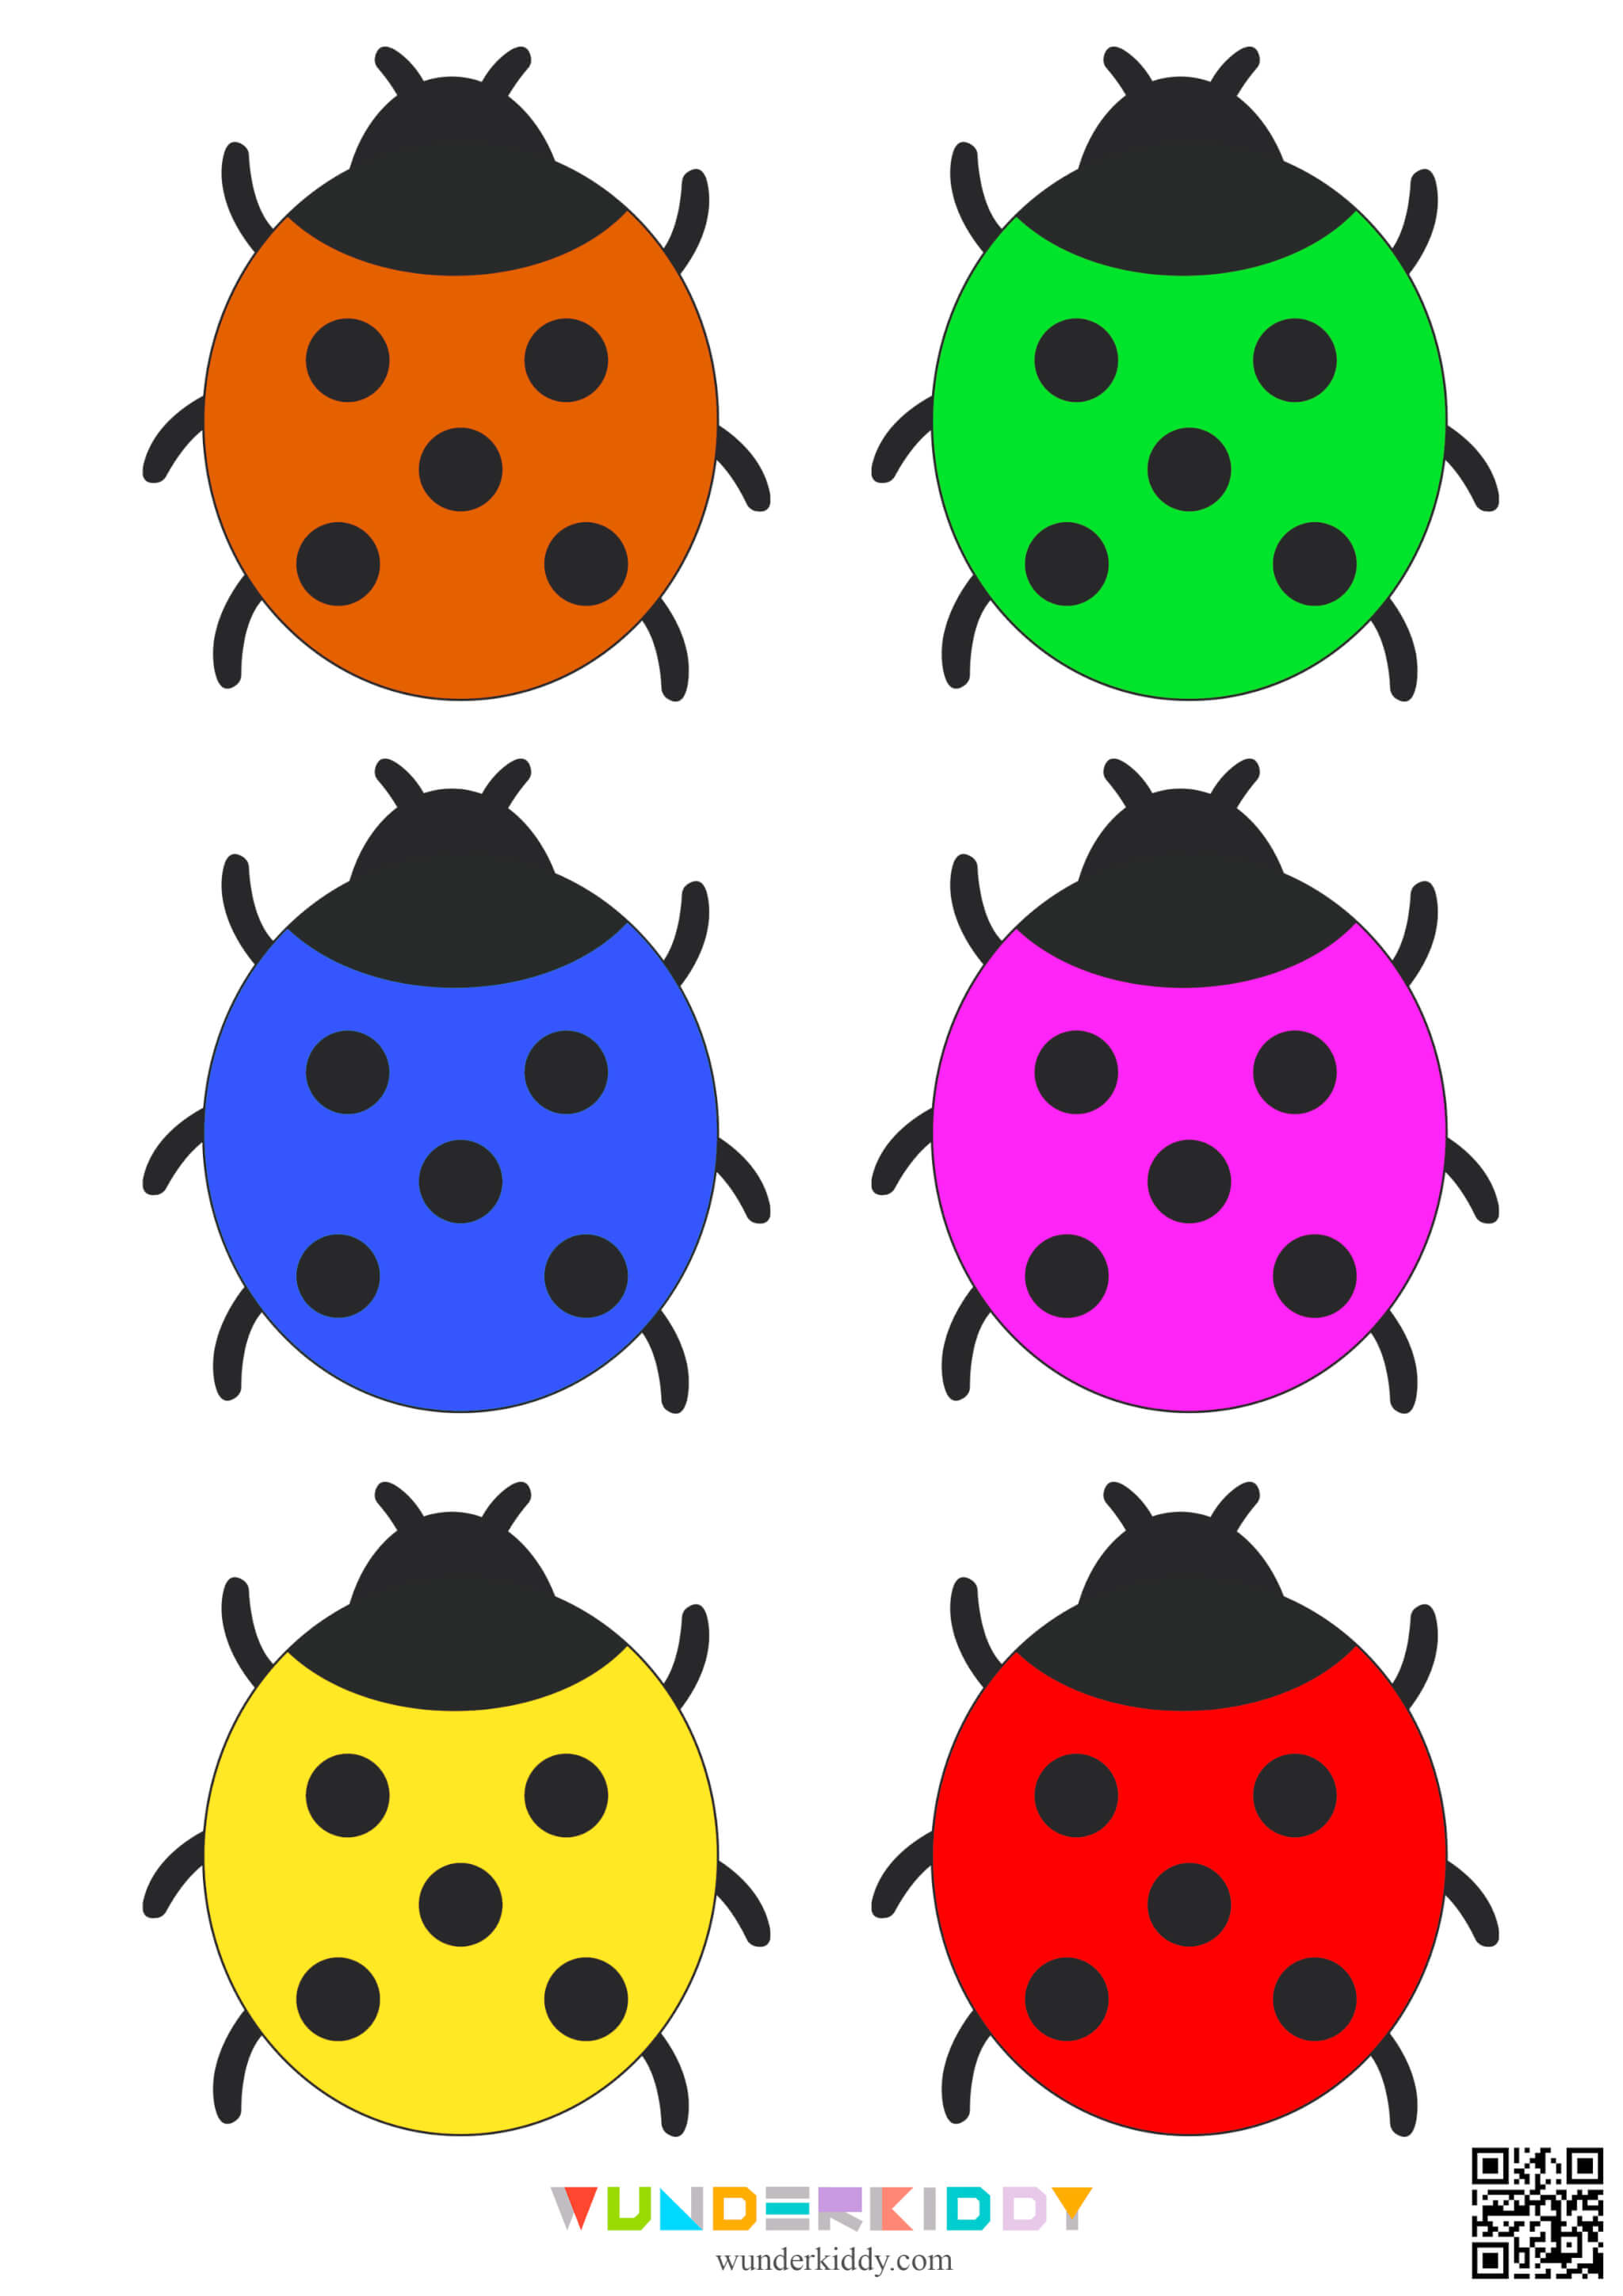 Ladybug Activity and Templates for Kids - Image 7